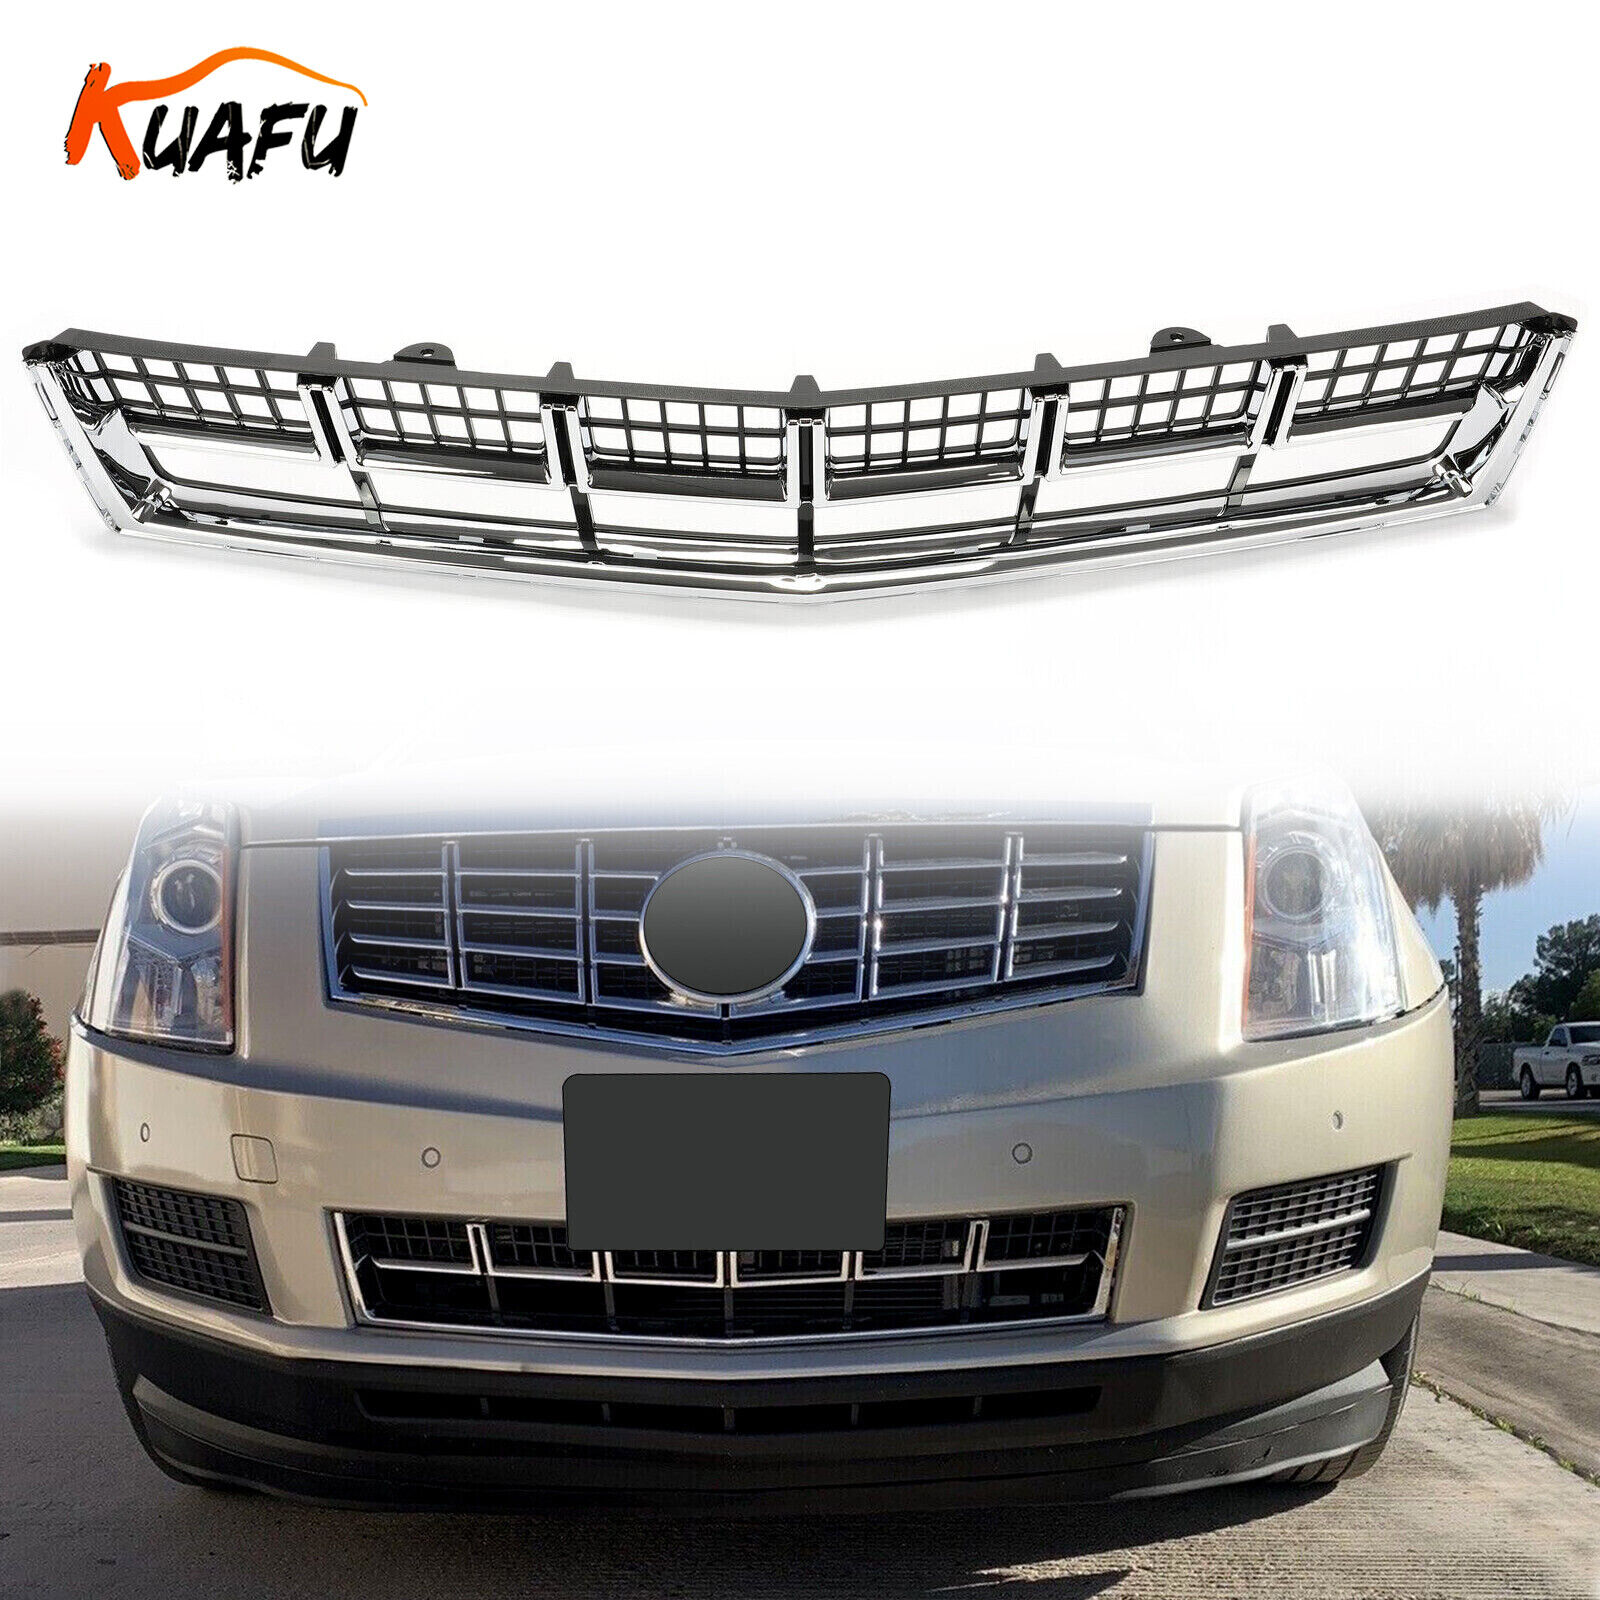 For Cadillac SRX 2013 - 2016 Front Bumper Lower Grille Chrome Mesh Grill